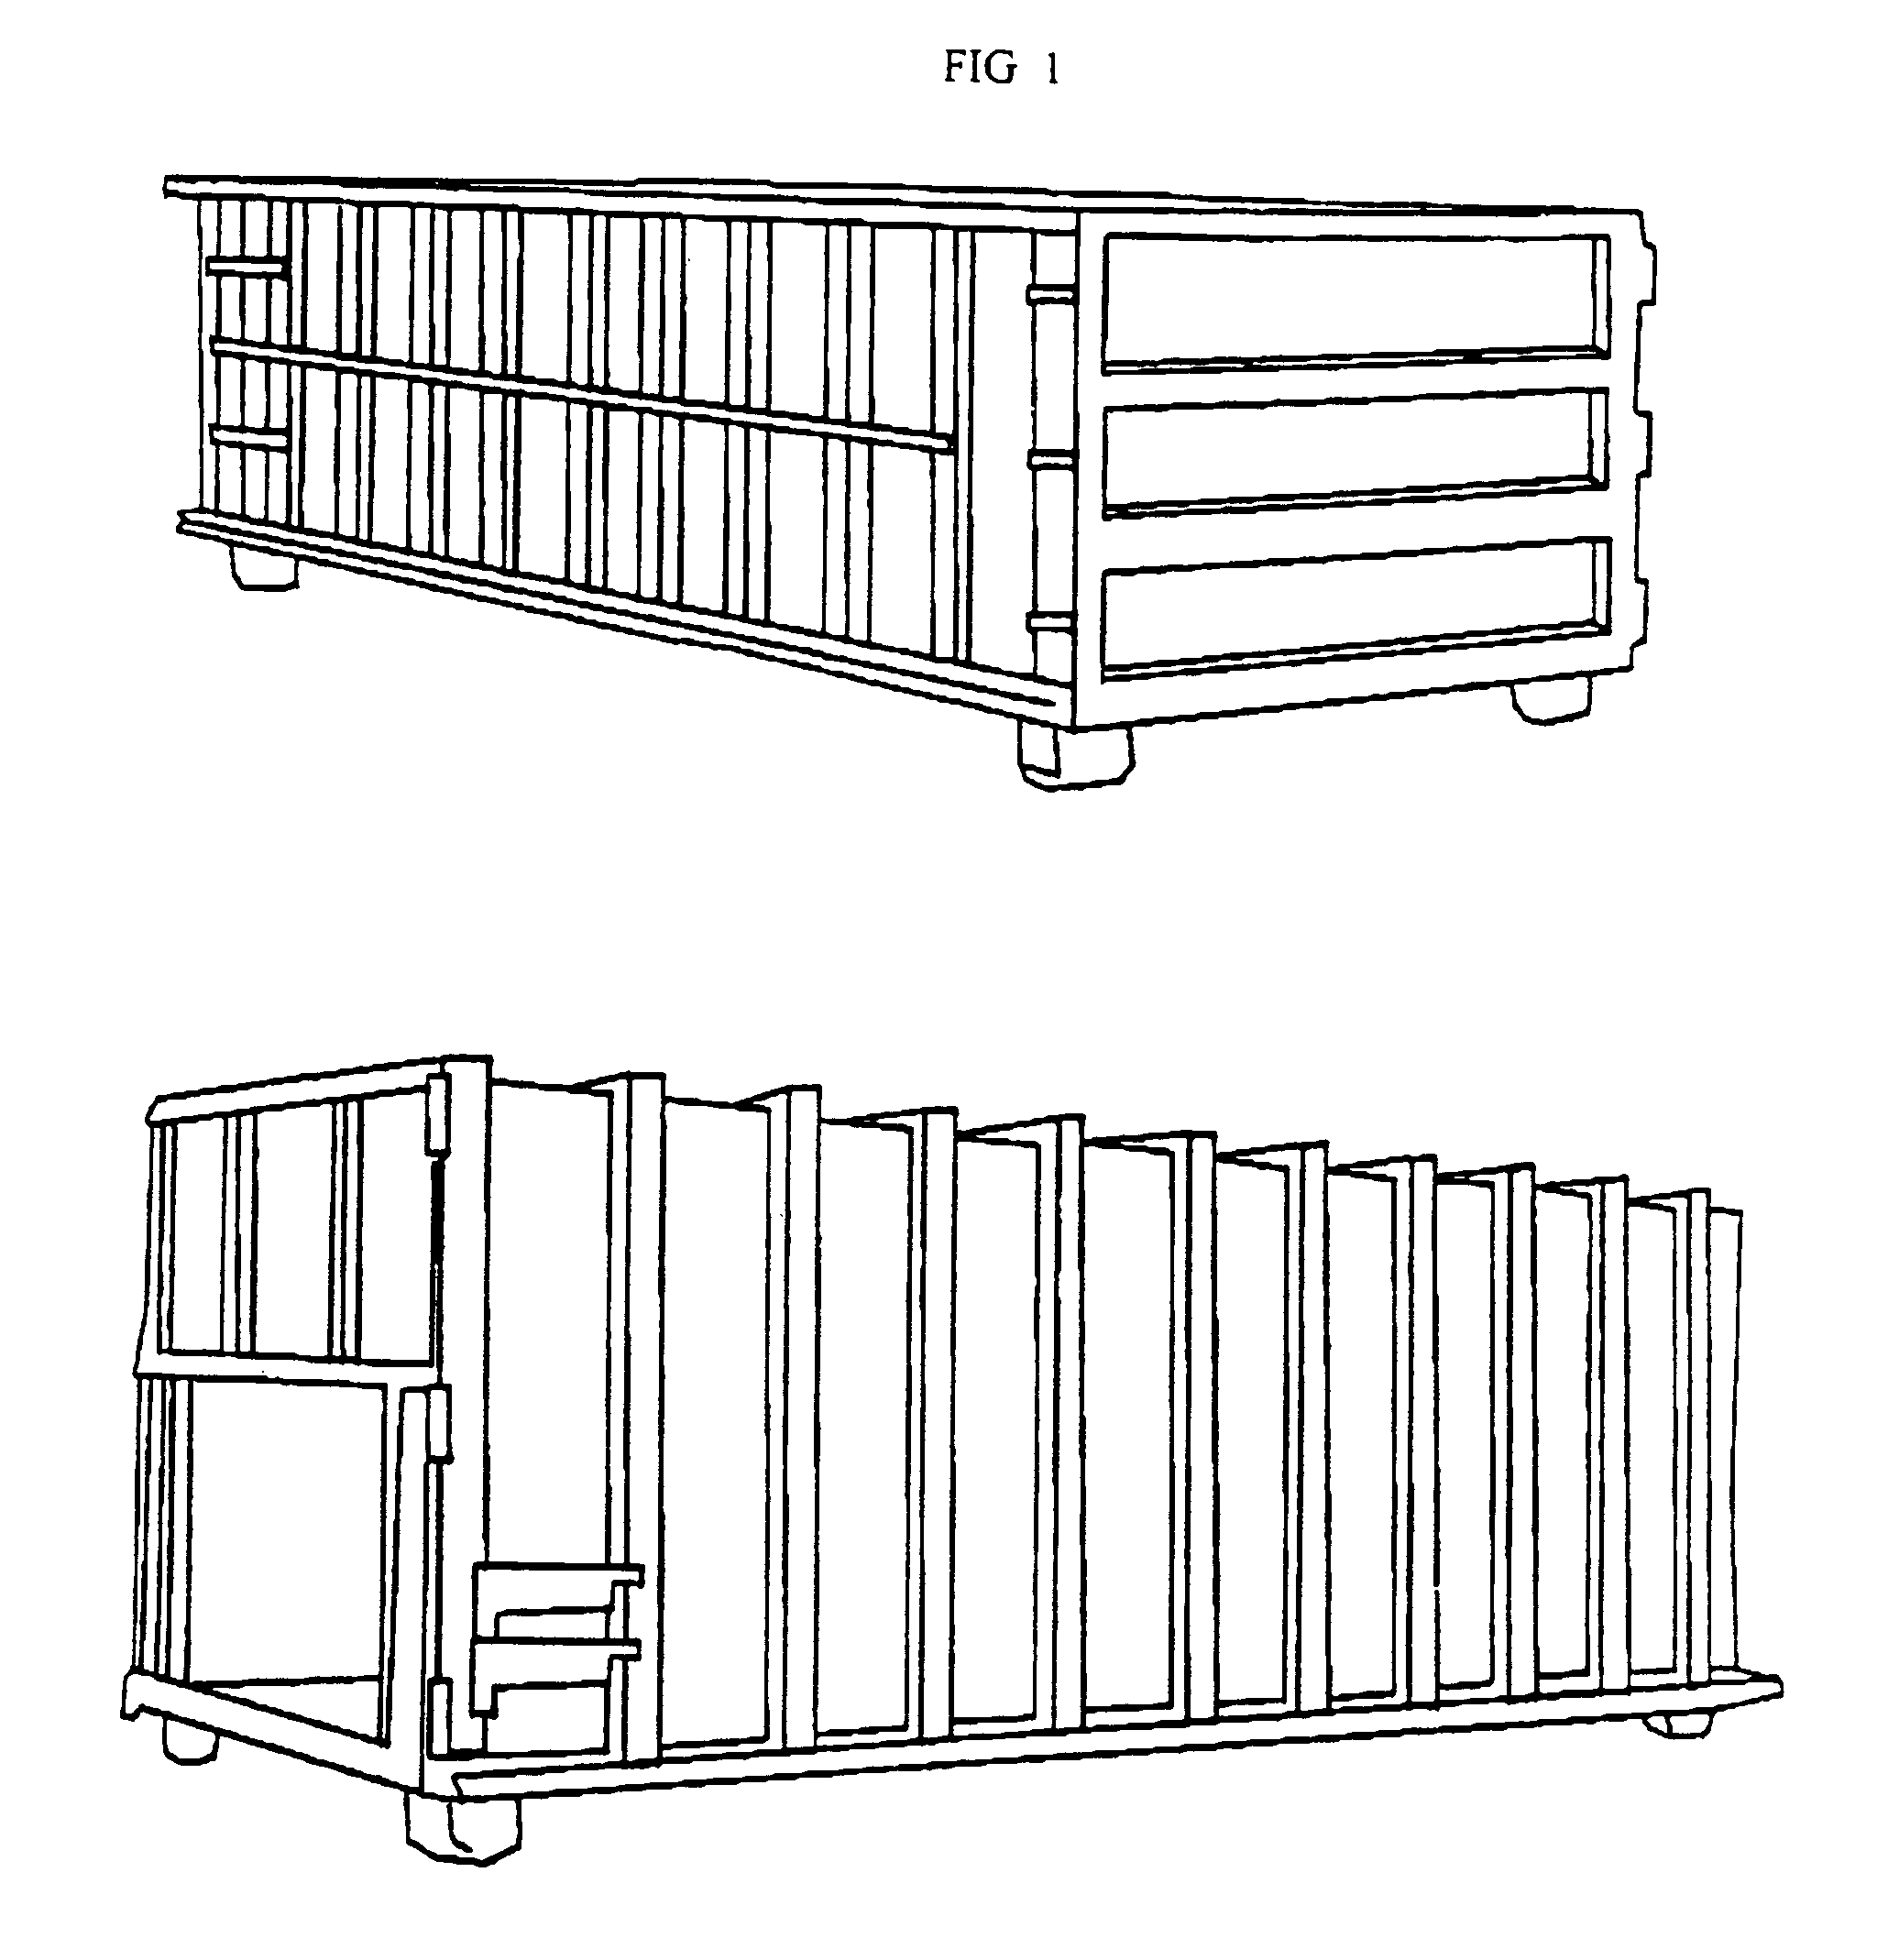 Containment bag system for use in a commercial disposal container